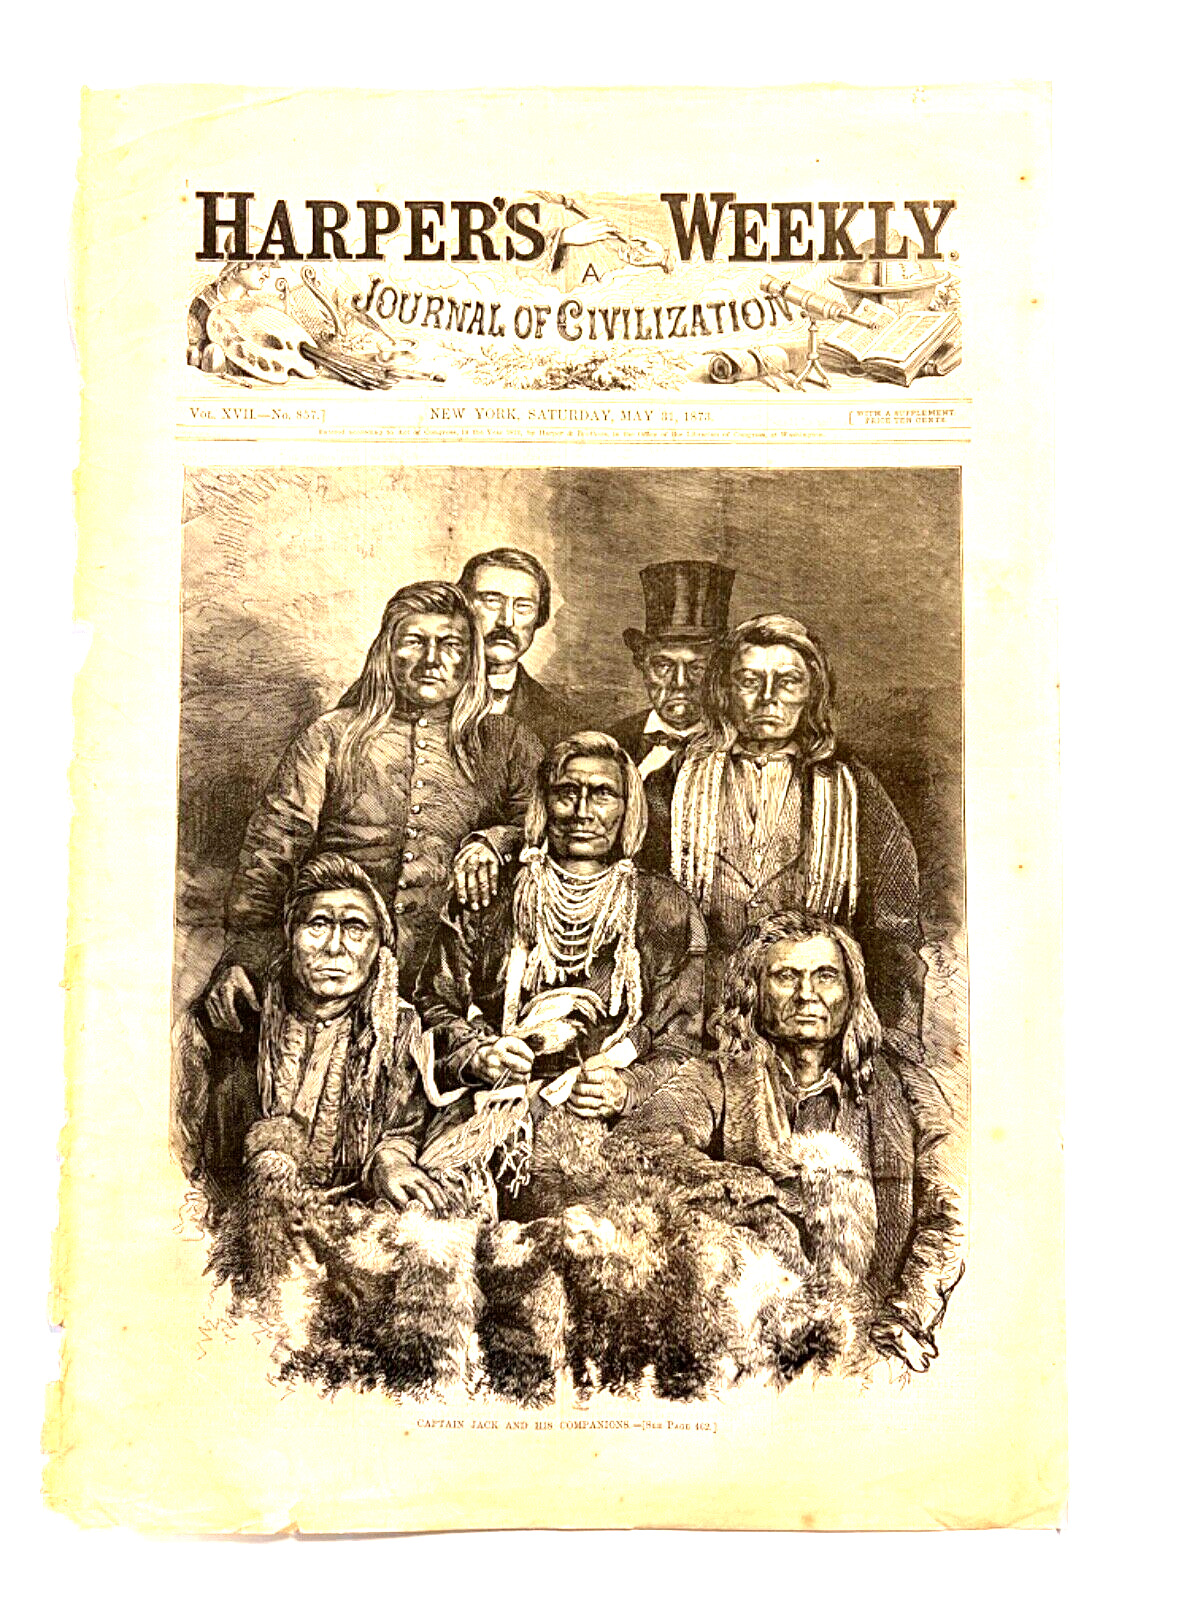 Original “Harper’s Weekly” May 31, 1873; “Captain Jack And His Companions”